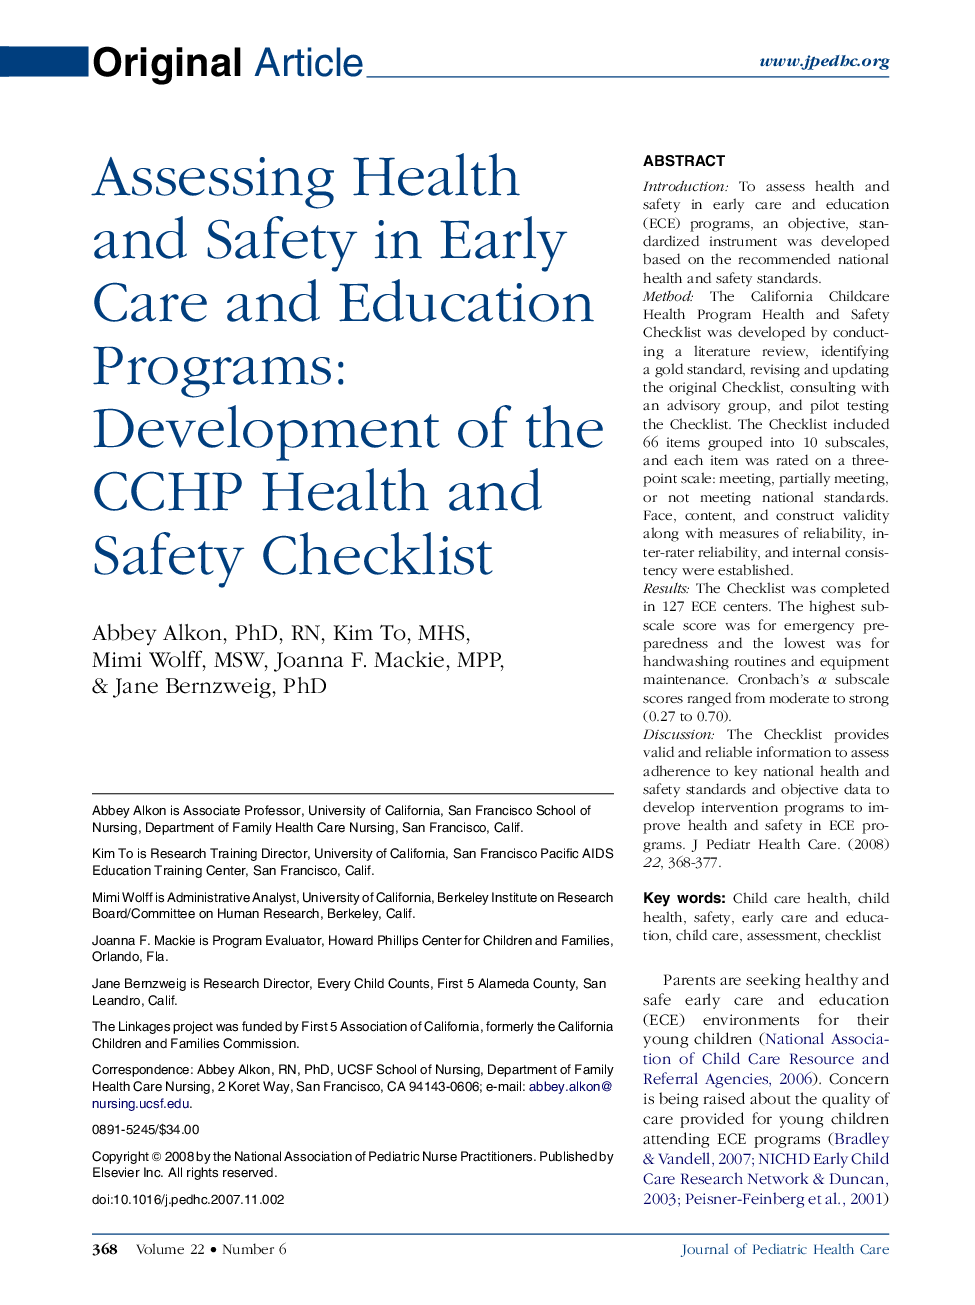 Assessing Health and Safety in Early Care and Education Programs: Development of the CCHP Health and Safety Checklist 